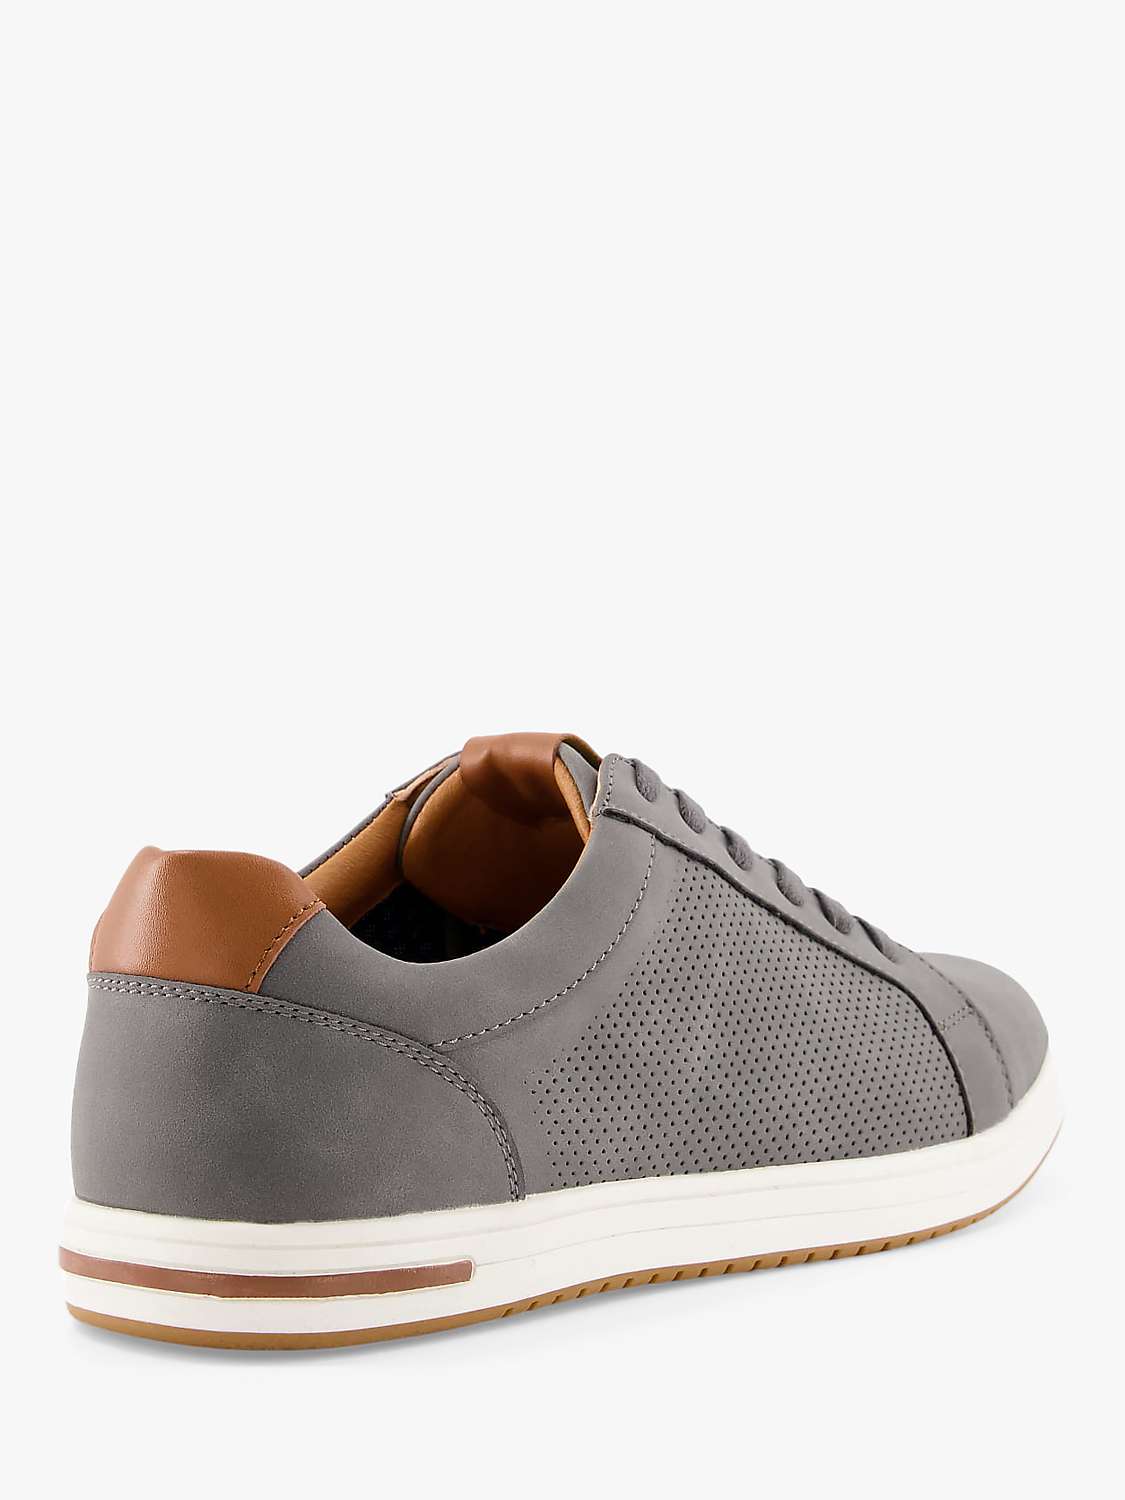 Buy Dune Tezzy Suedette Lace Up Trainers Online at johnlewis.com